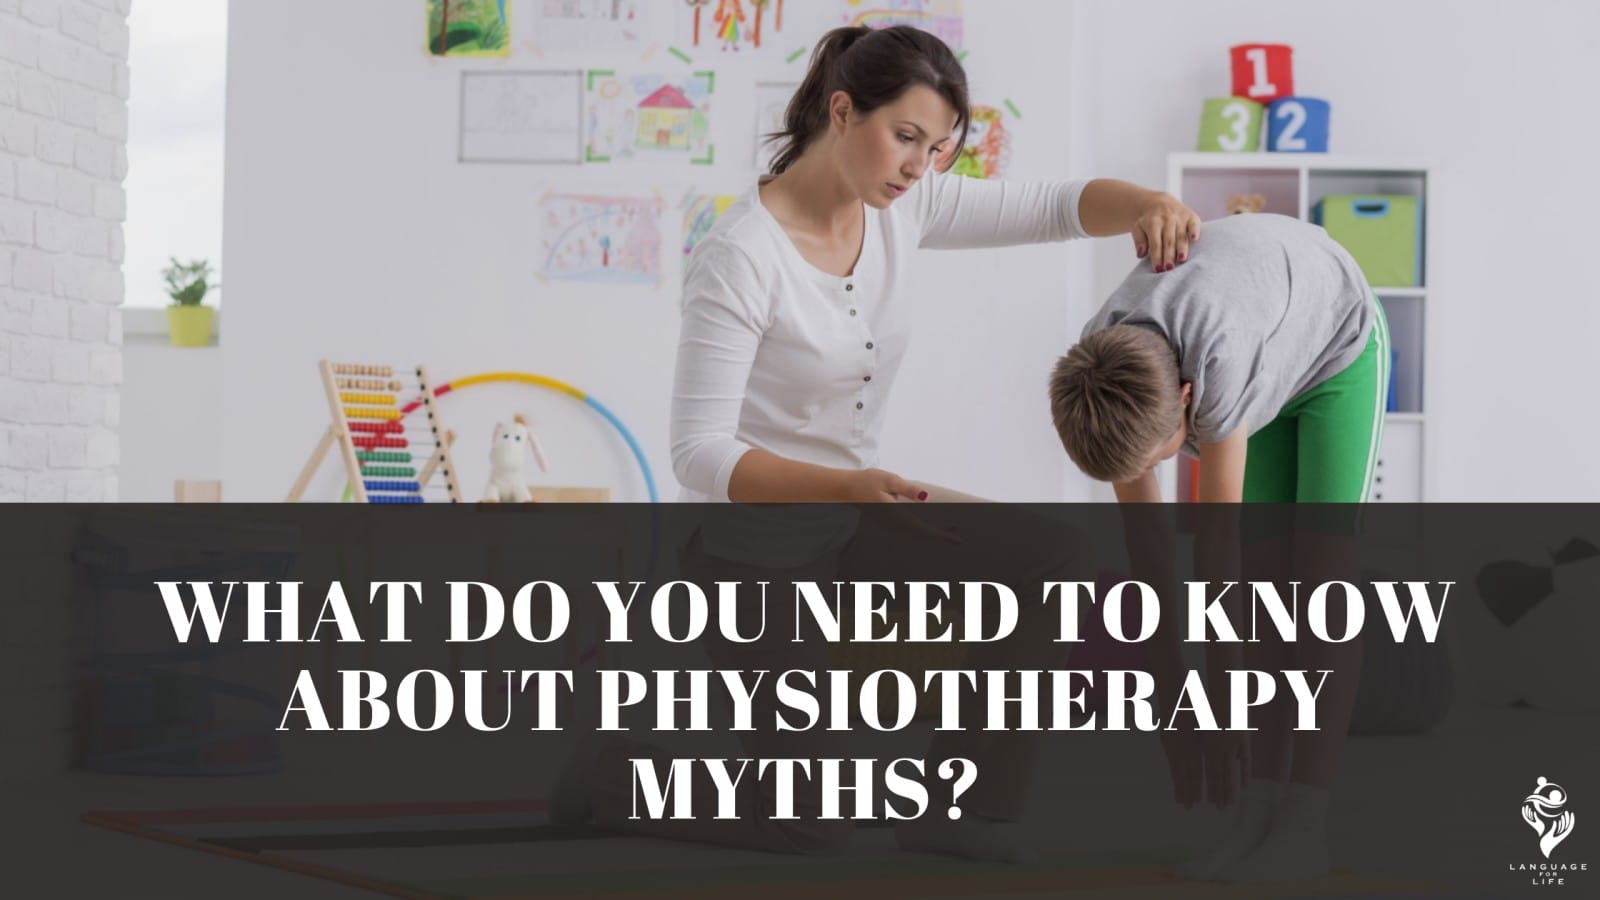 Physiotherapy myths